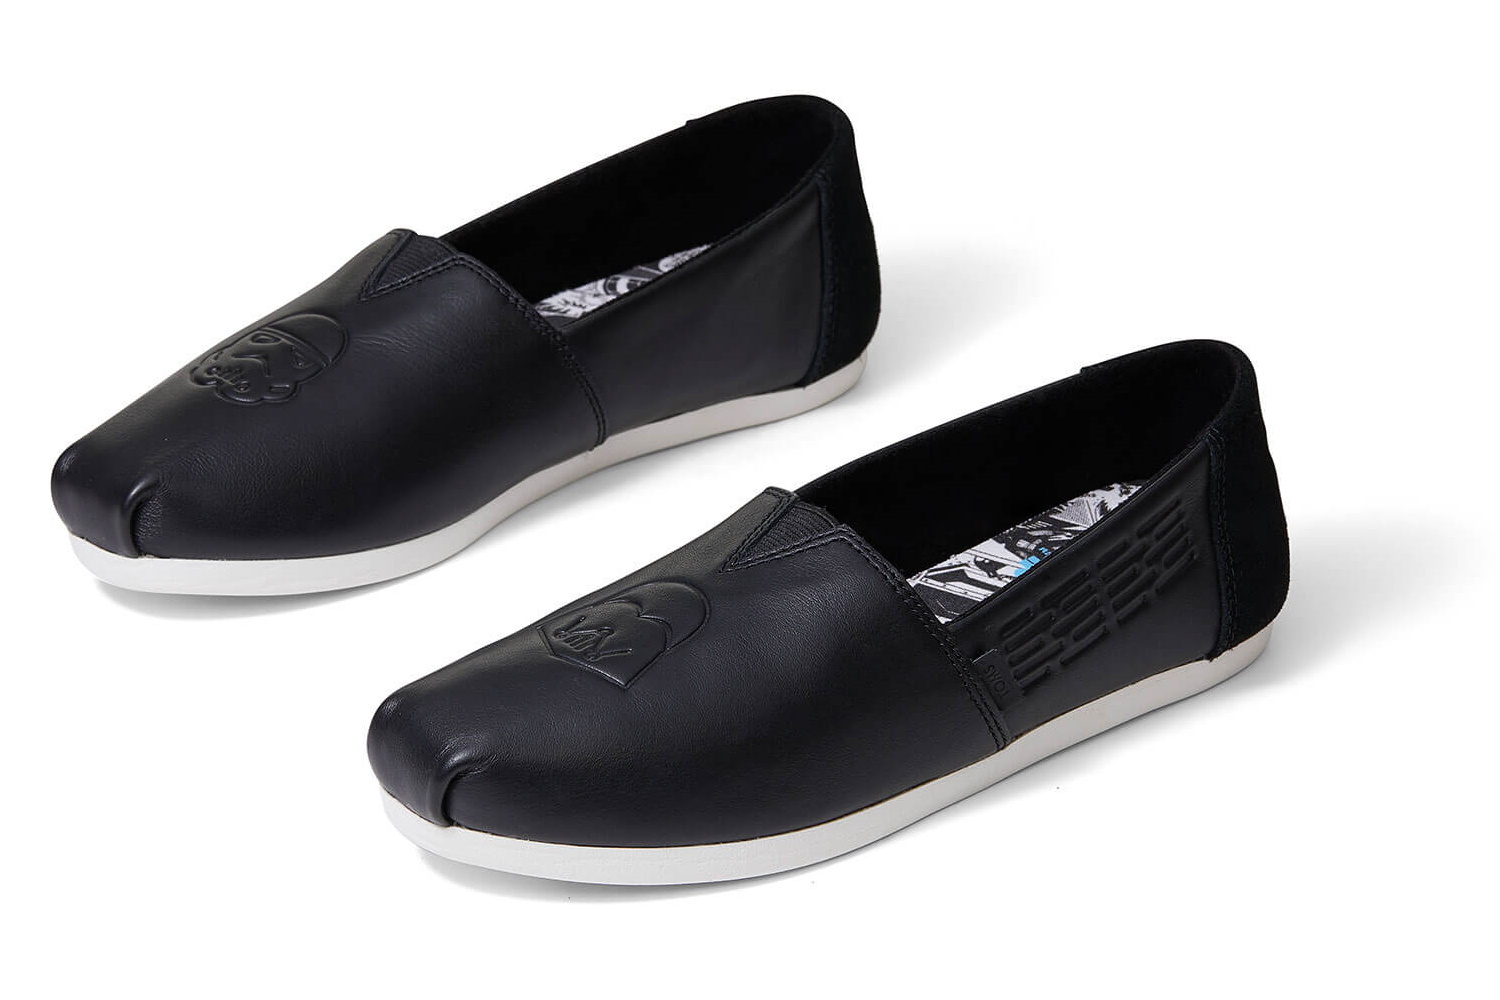 New Toms x Star Wars Collection Release - The Kessel Runway